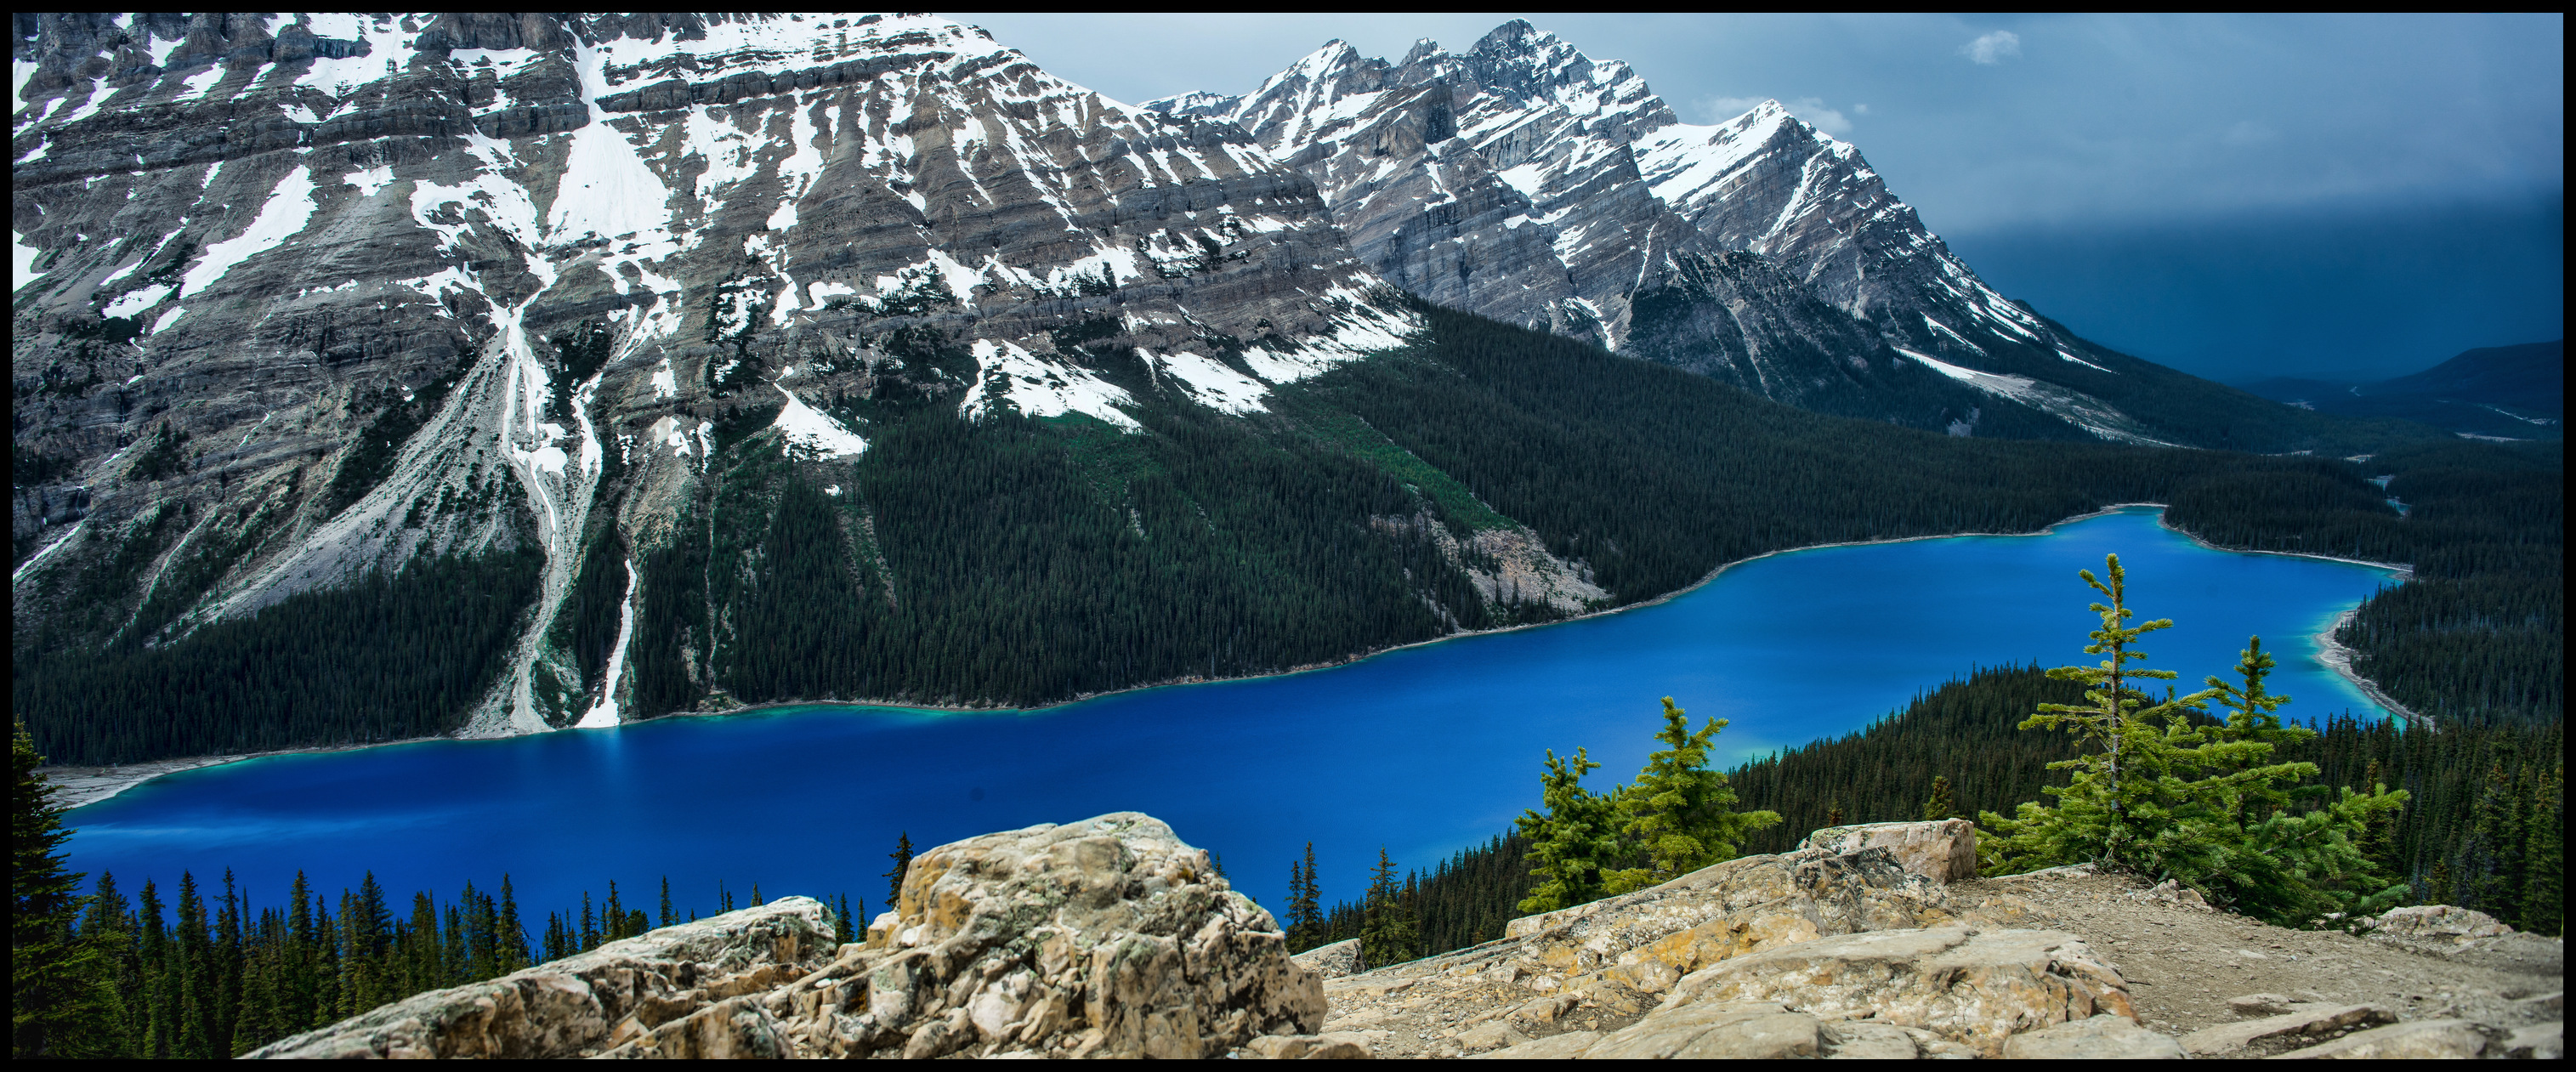 Peyto Lake spring colours in May, after a rainstorm Sony A7 / Canon FD Tilt Shift 35 2.8